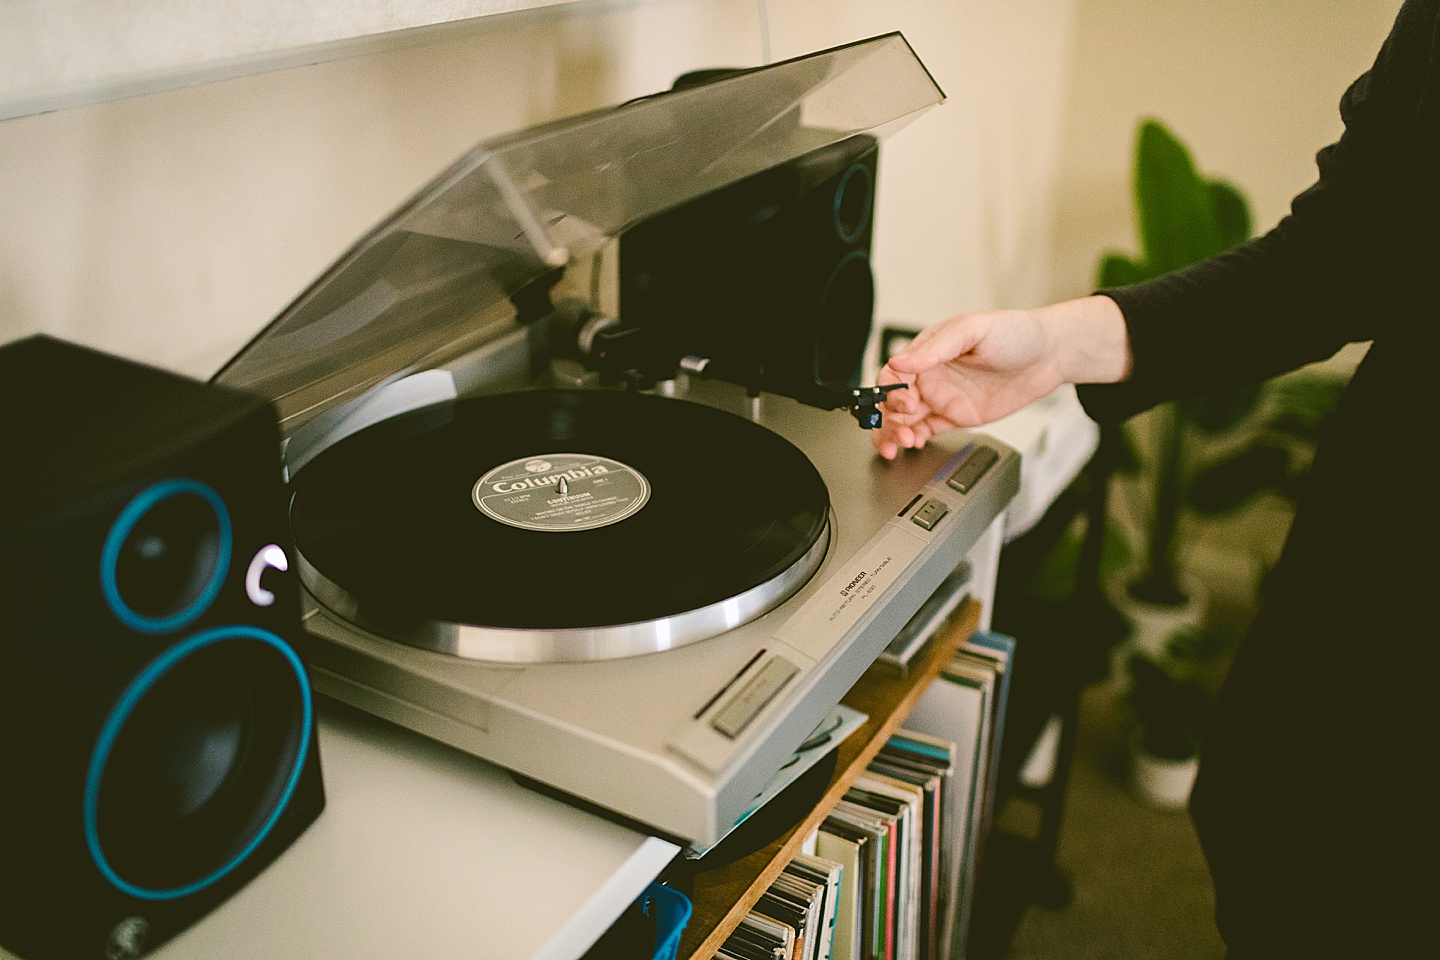 Putting a vinyl record on a player